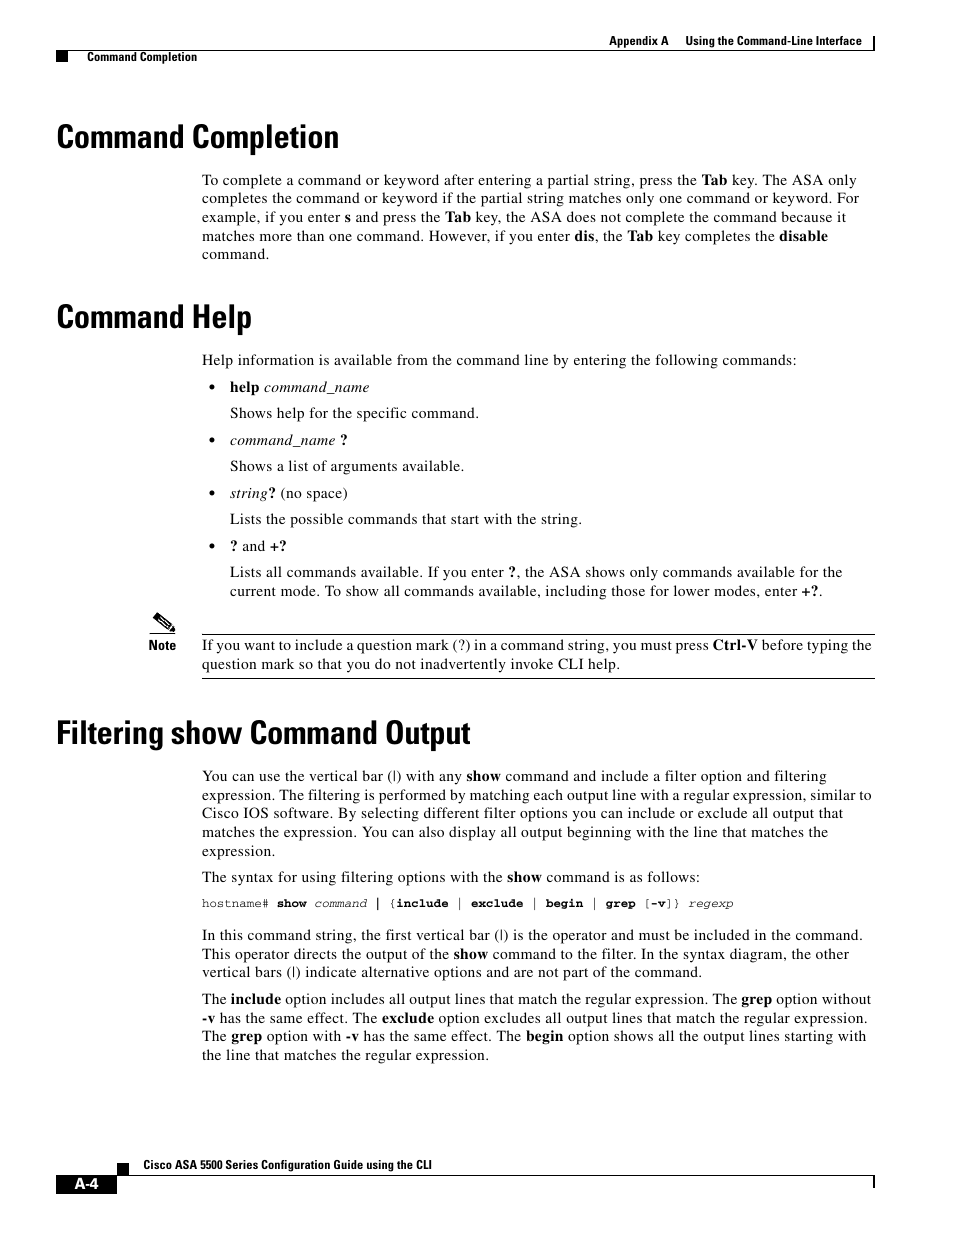 Command completion, Command help, Filtering show command output | Cisco ASA 5505 User Manual | Page 1878 / 1994